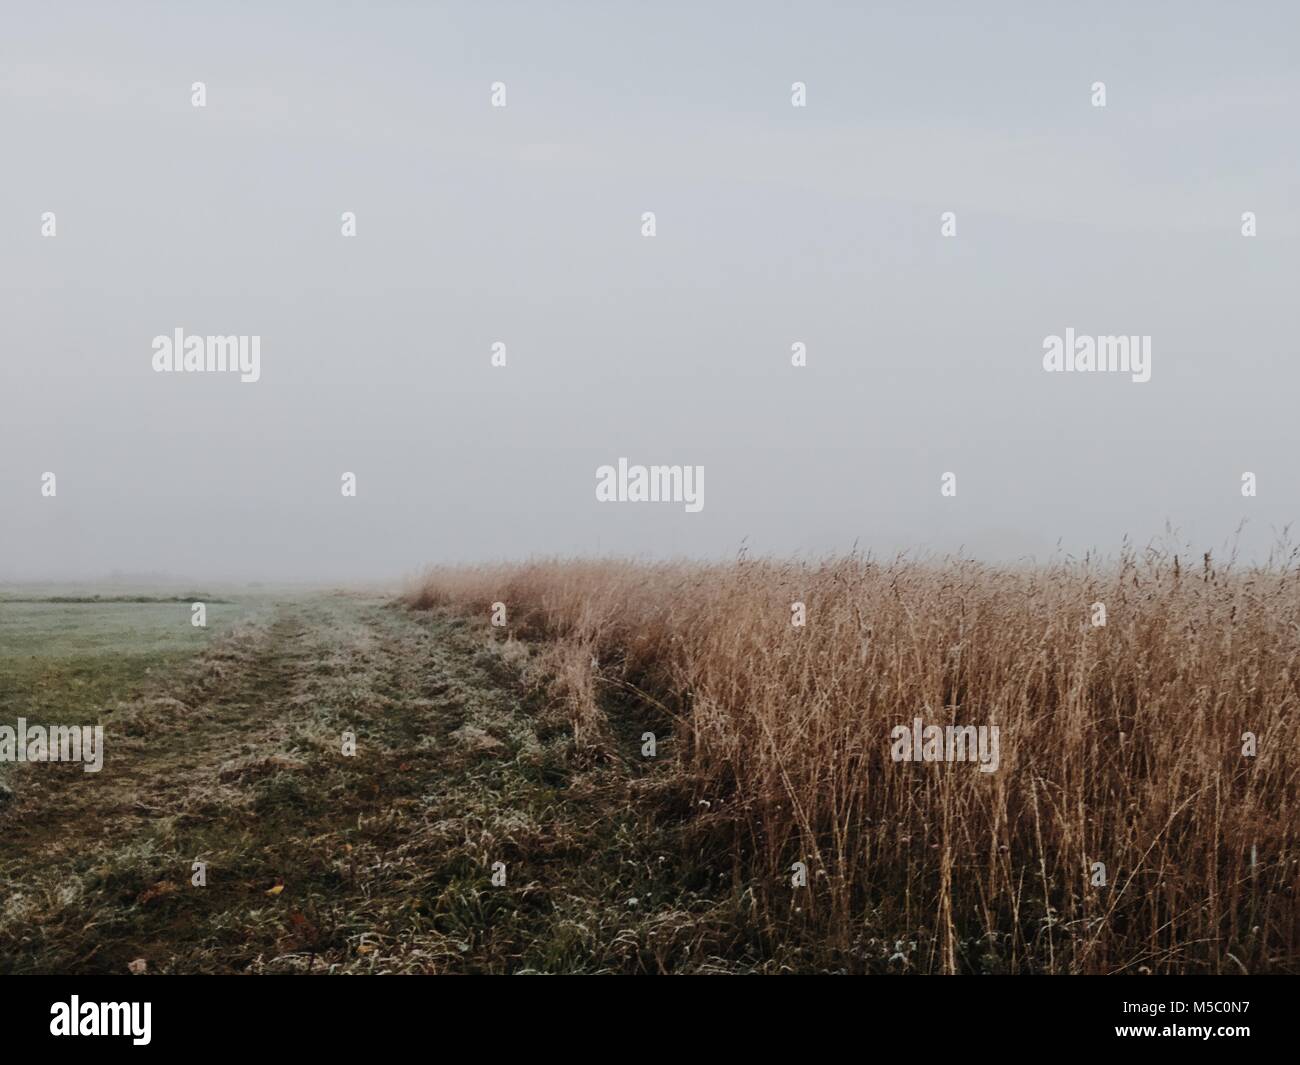 White nothing behind wheat field. Harsh autumn scene with fog. Stock Photo